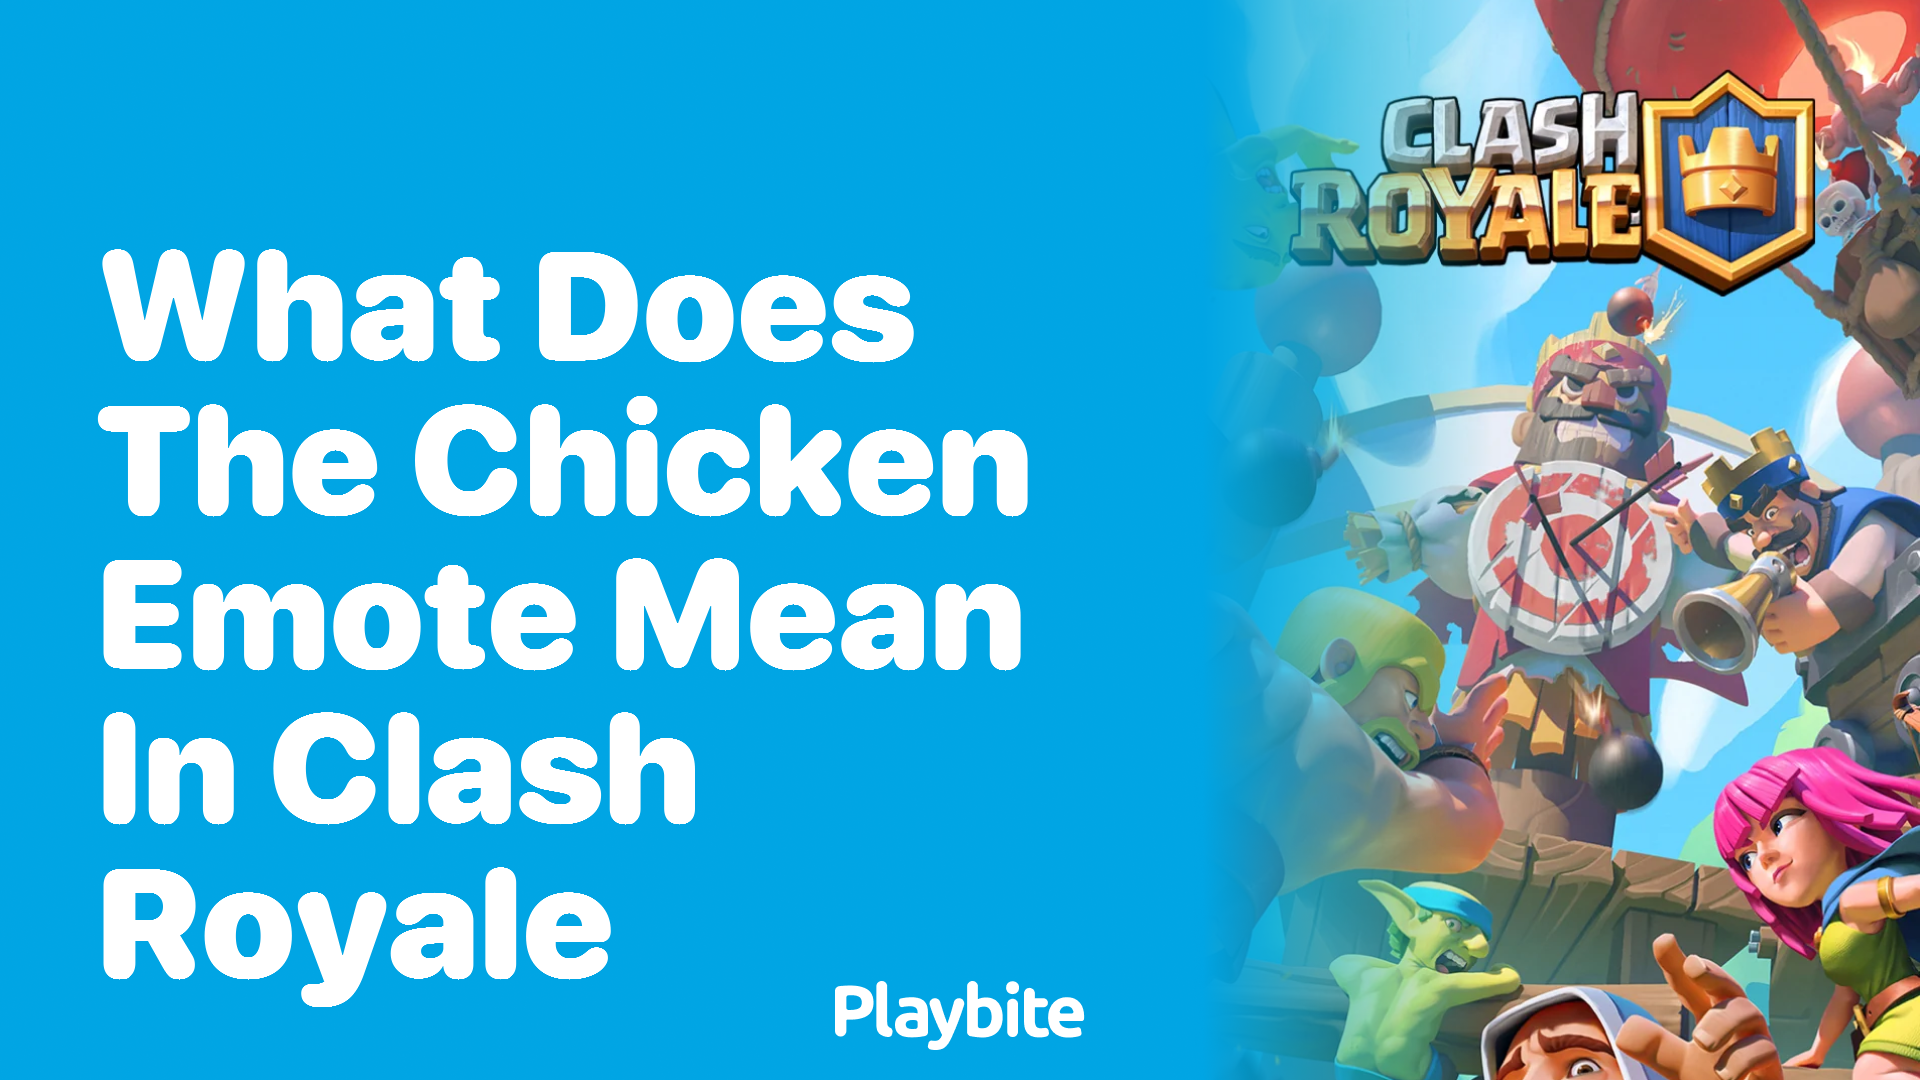 What Does the Chicken Emote Mean in Clash Royale?